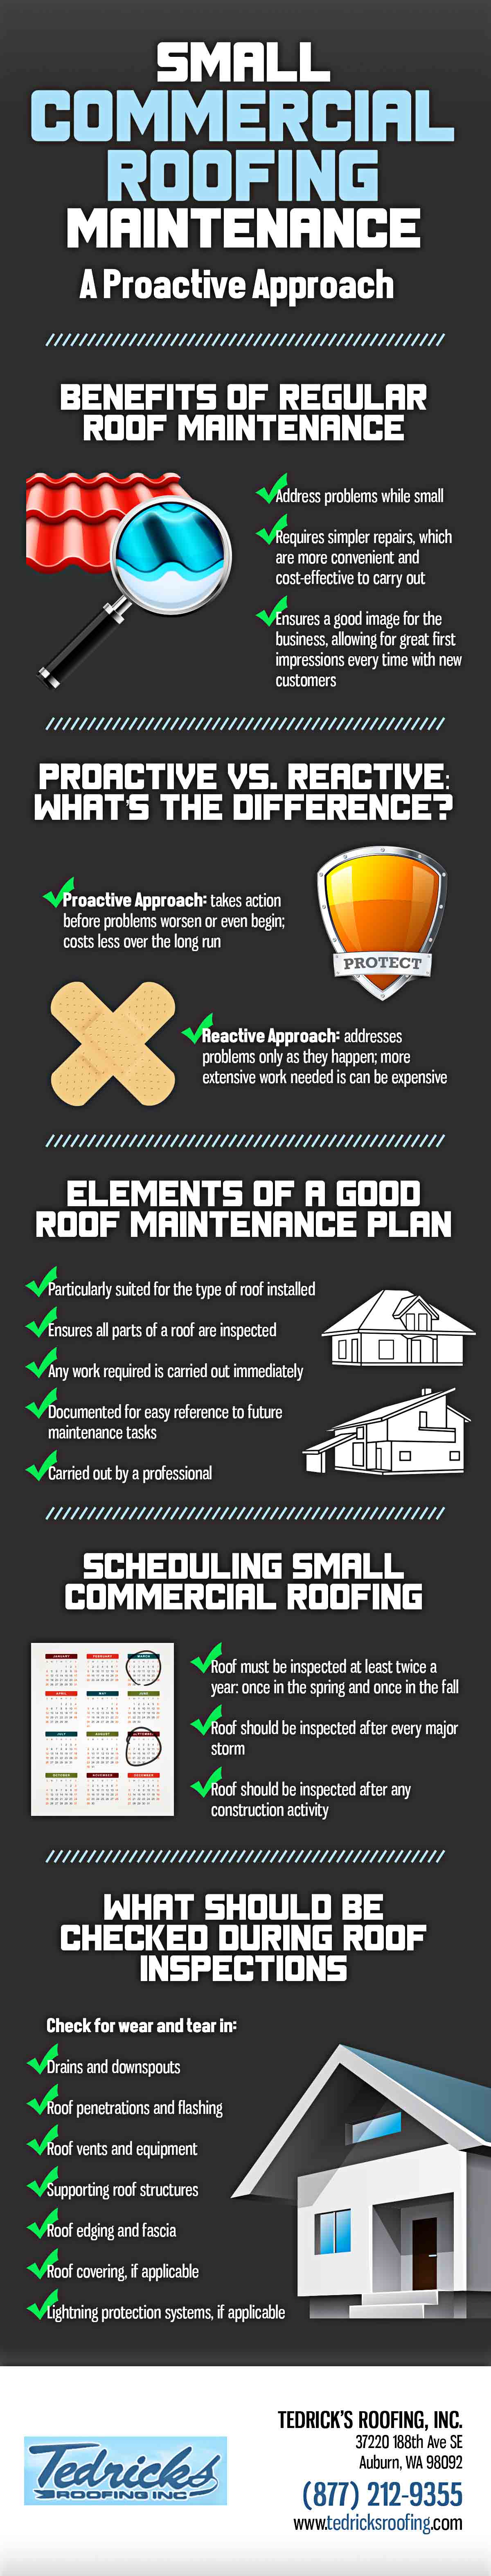 Infographic - TedricksRoofing.com - Small Commercial Roofing Maintenance A Proactive Approach - 11.06.15 (Martin) (Dianne)(Ben)